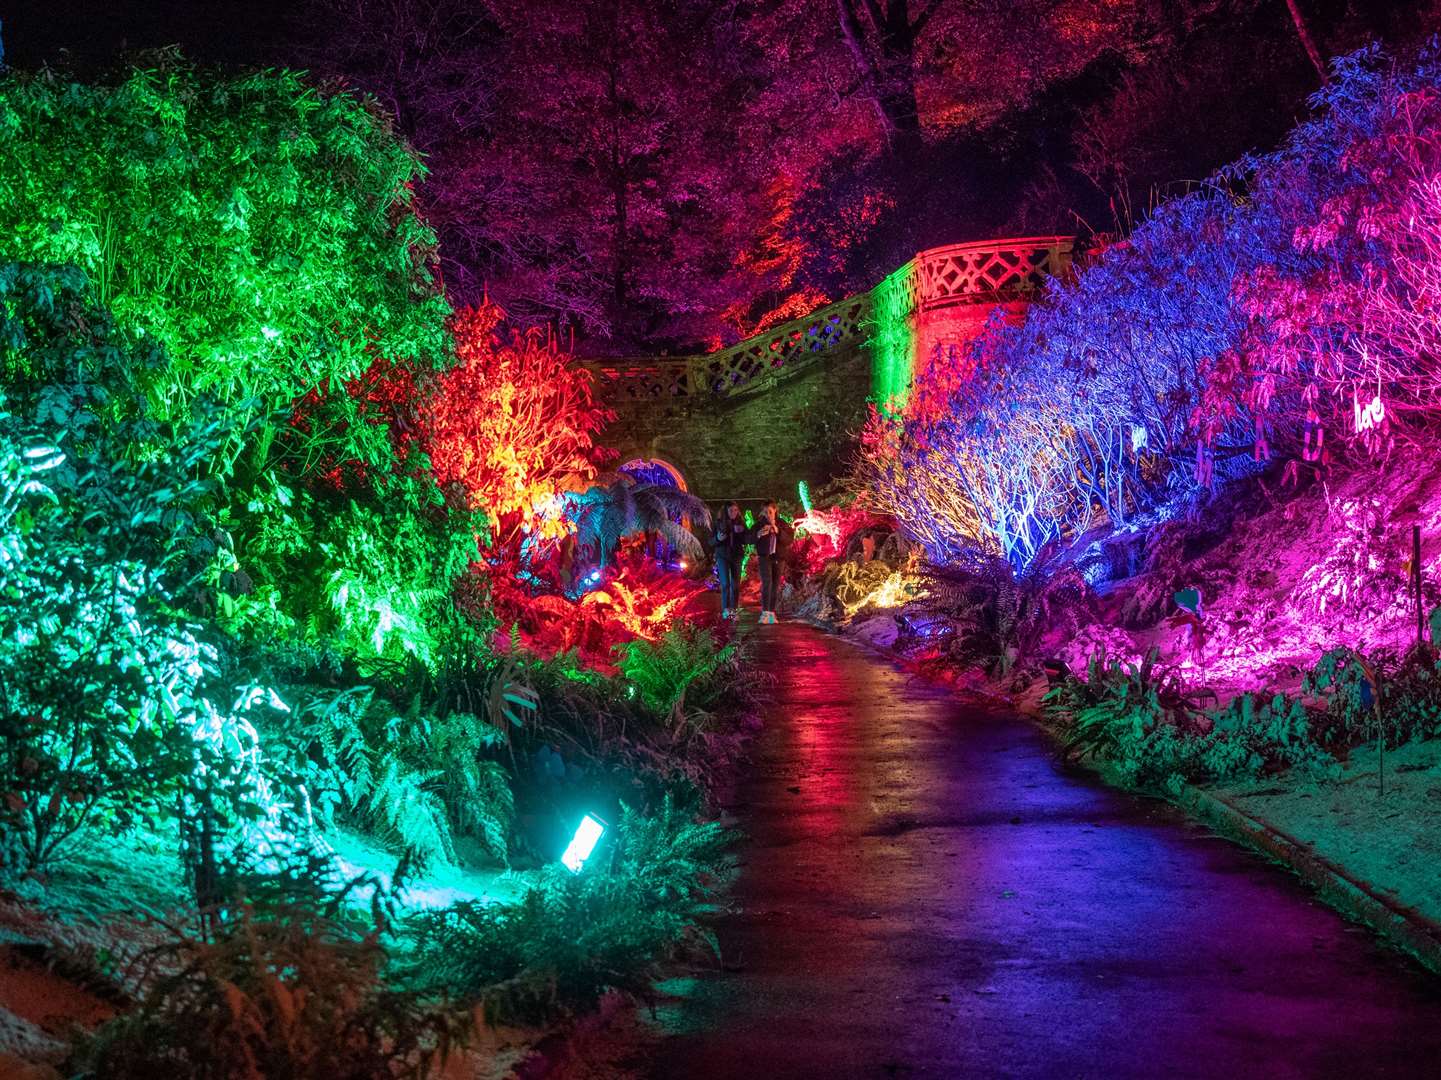 Hever Castle will be lit up this Christmas